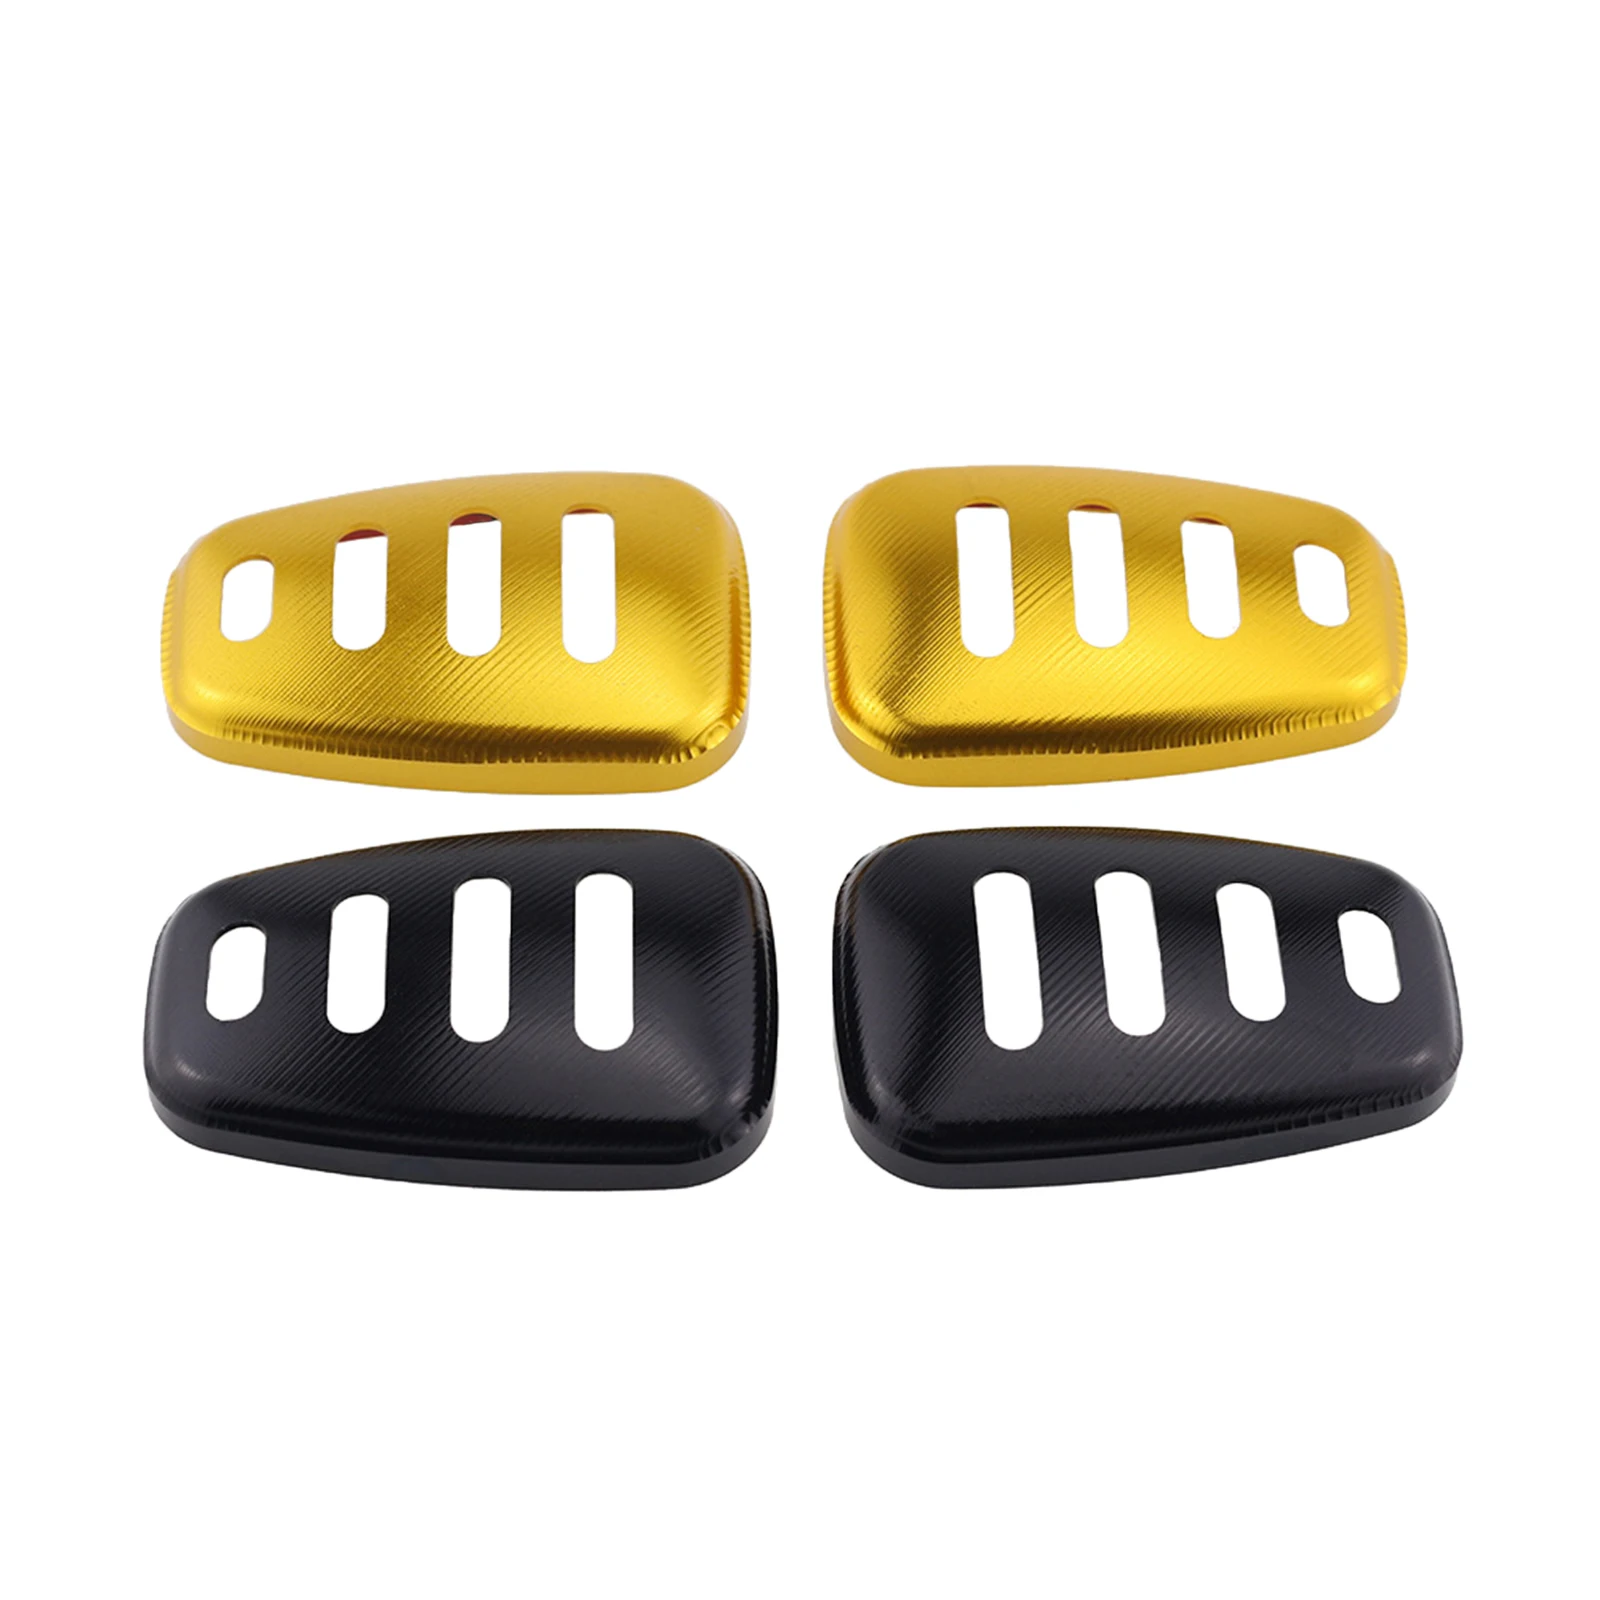 Set of 2 Motorbike Front and Rear Turn Signal Light Cover Cages Shield Accessories Parts for DUCATI Scrambler 800 18-21